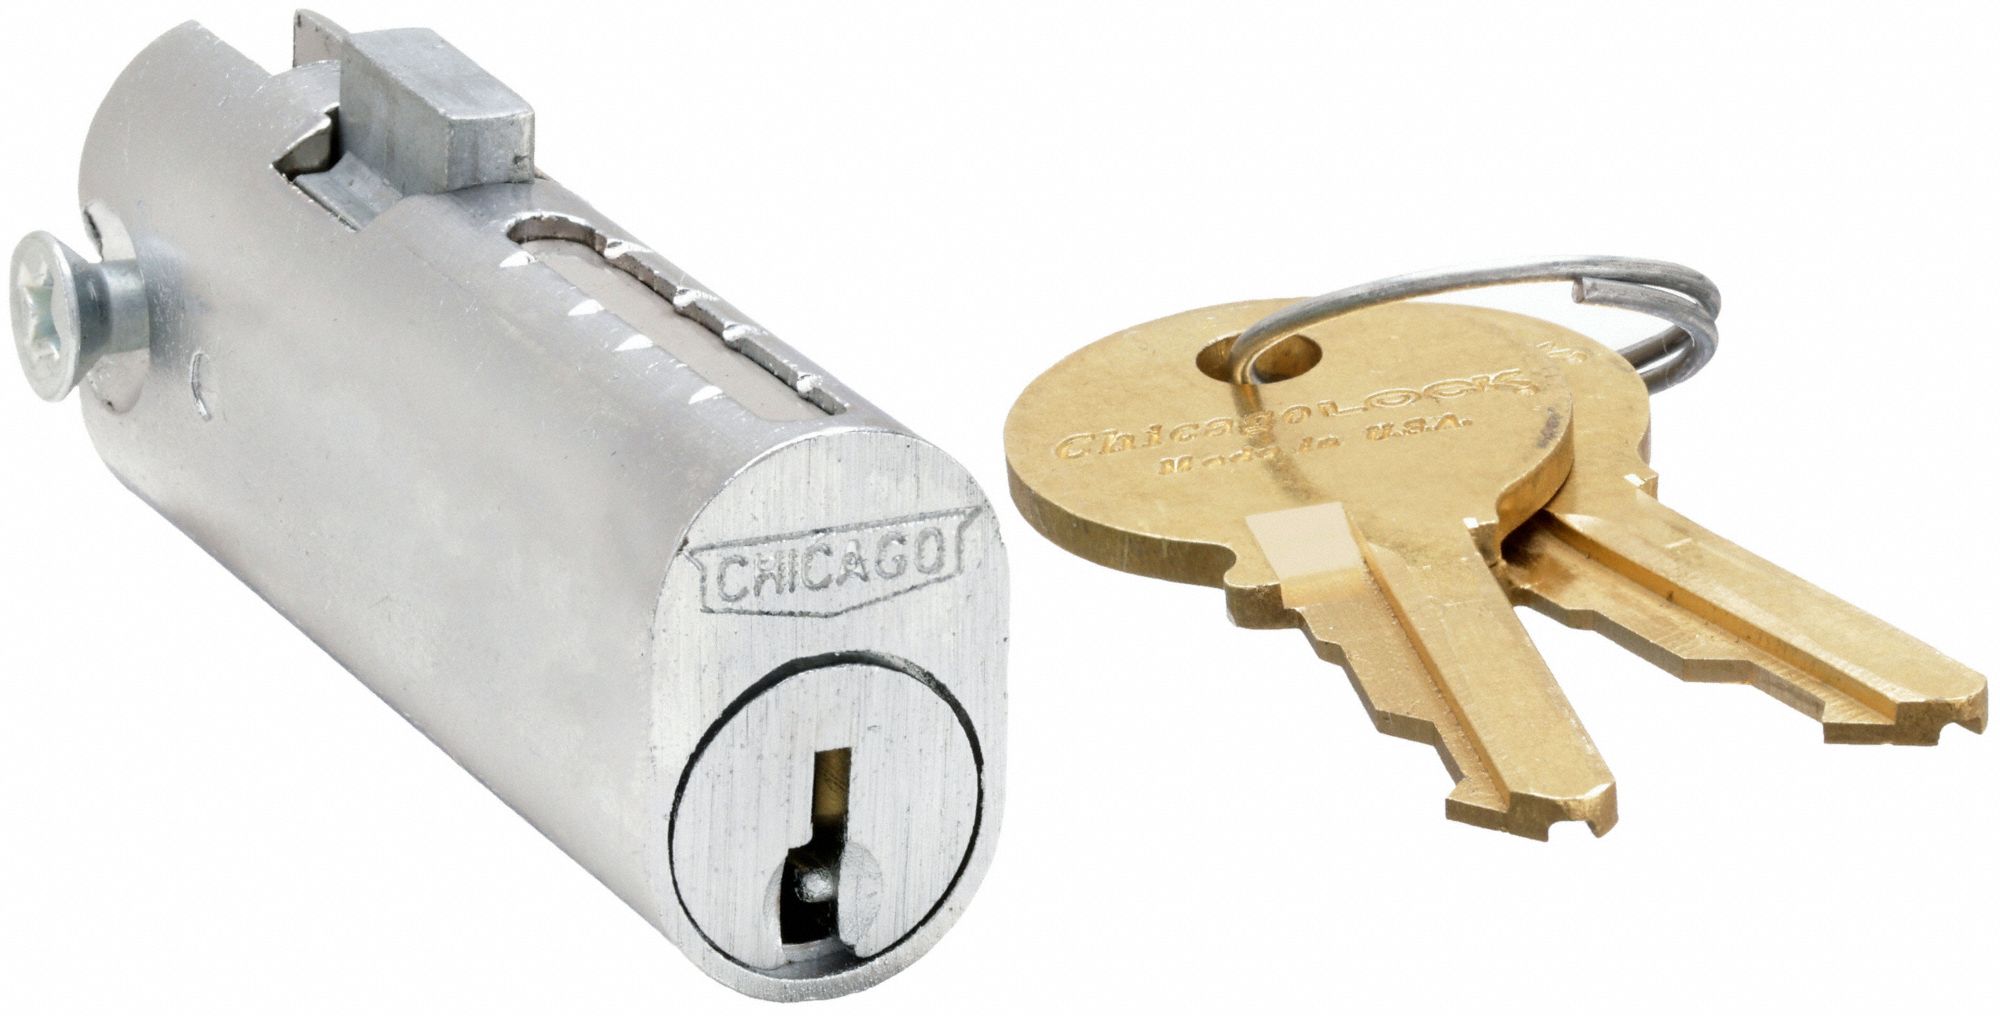 Length Compx Chicago C5002lp-1X03 File Cabinet Lock Key 1X03 2 In 